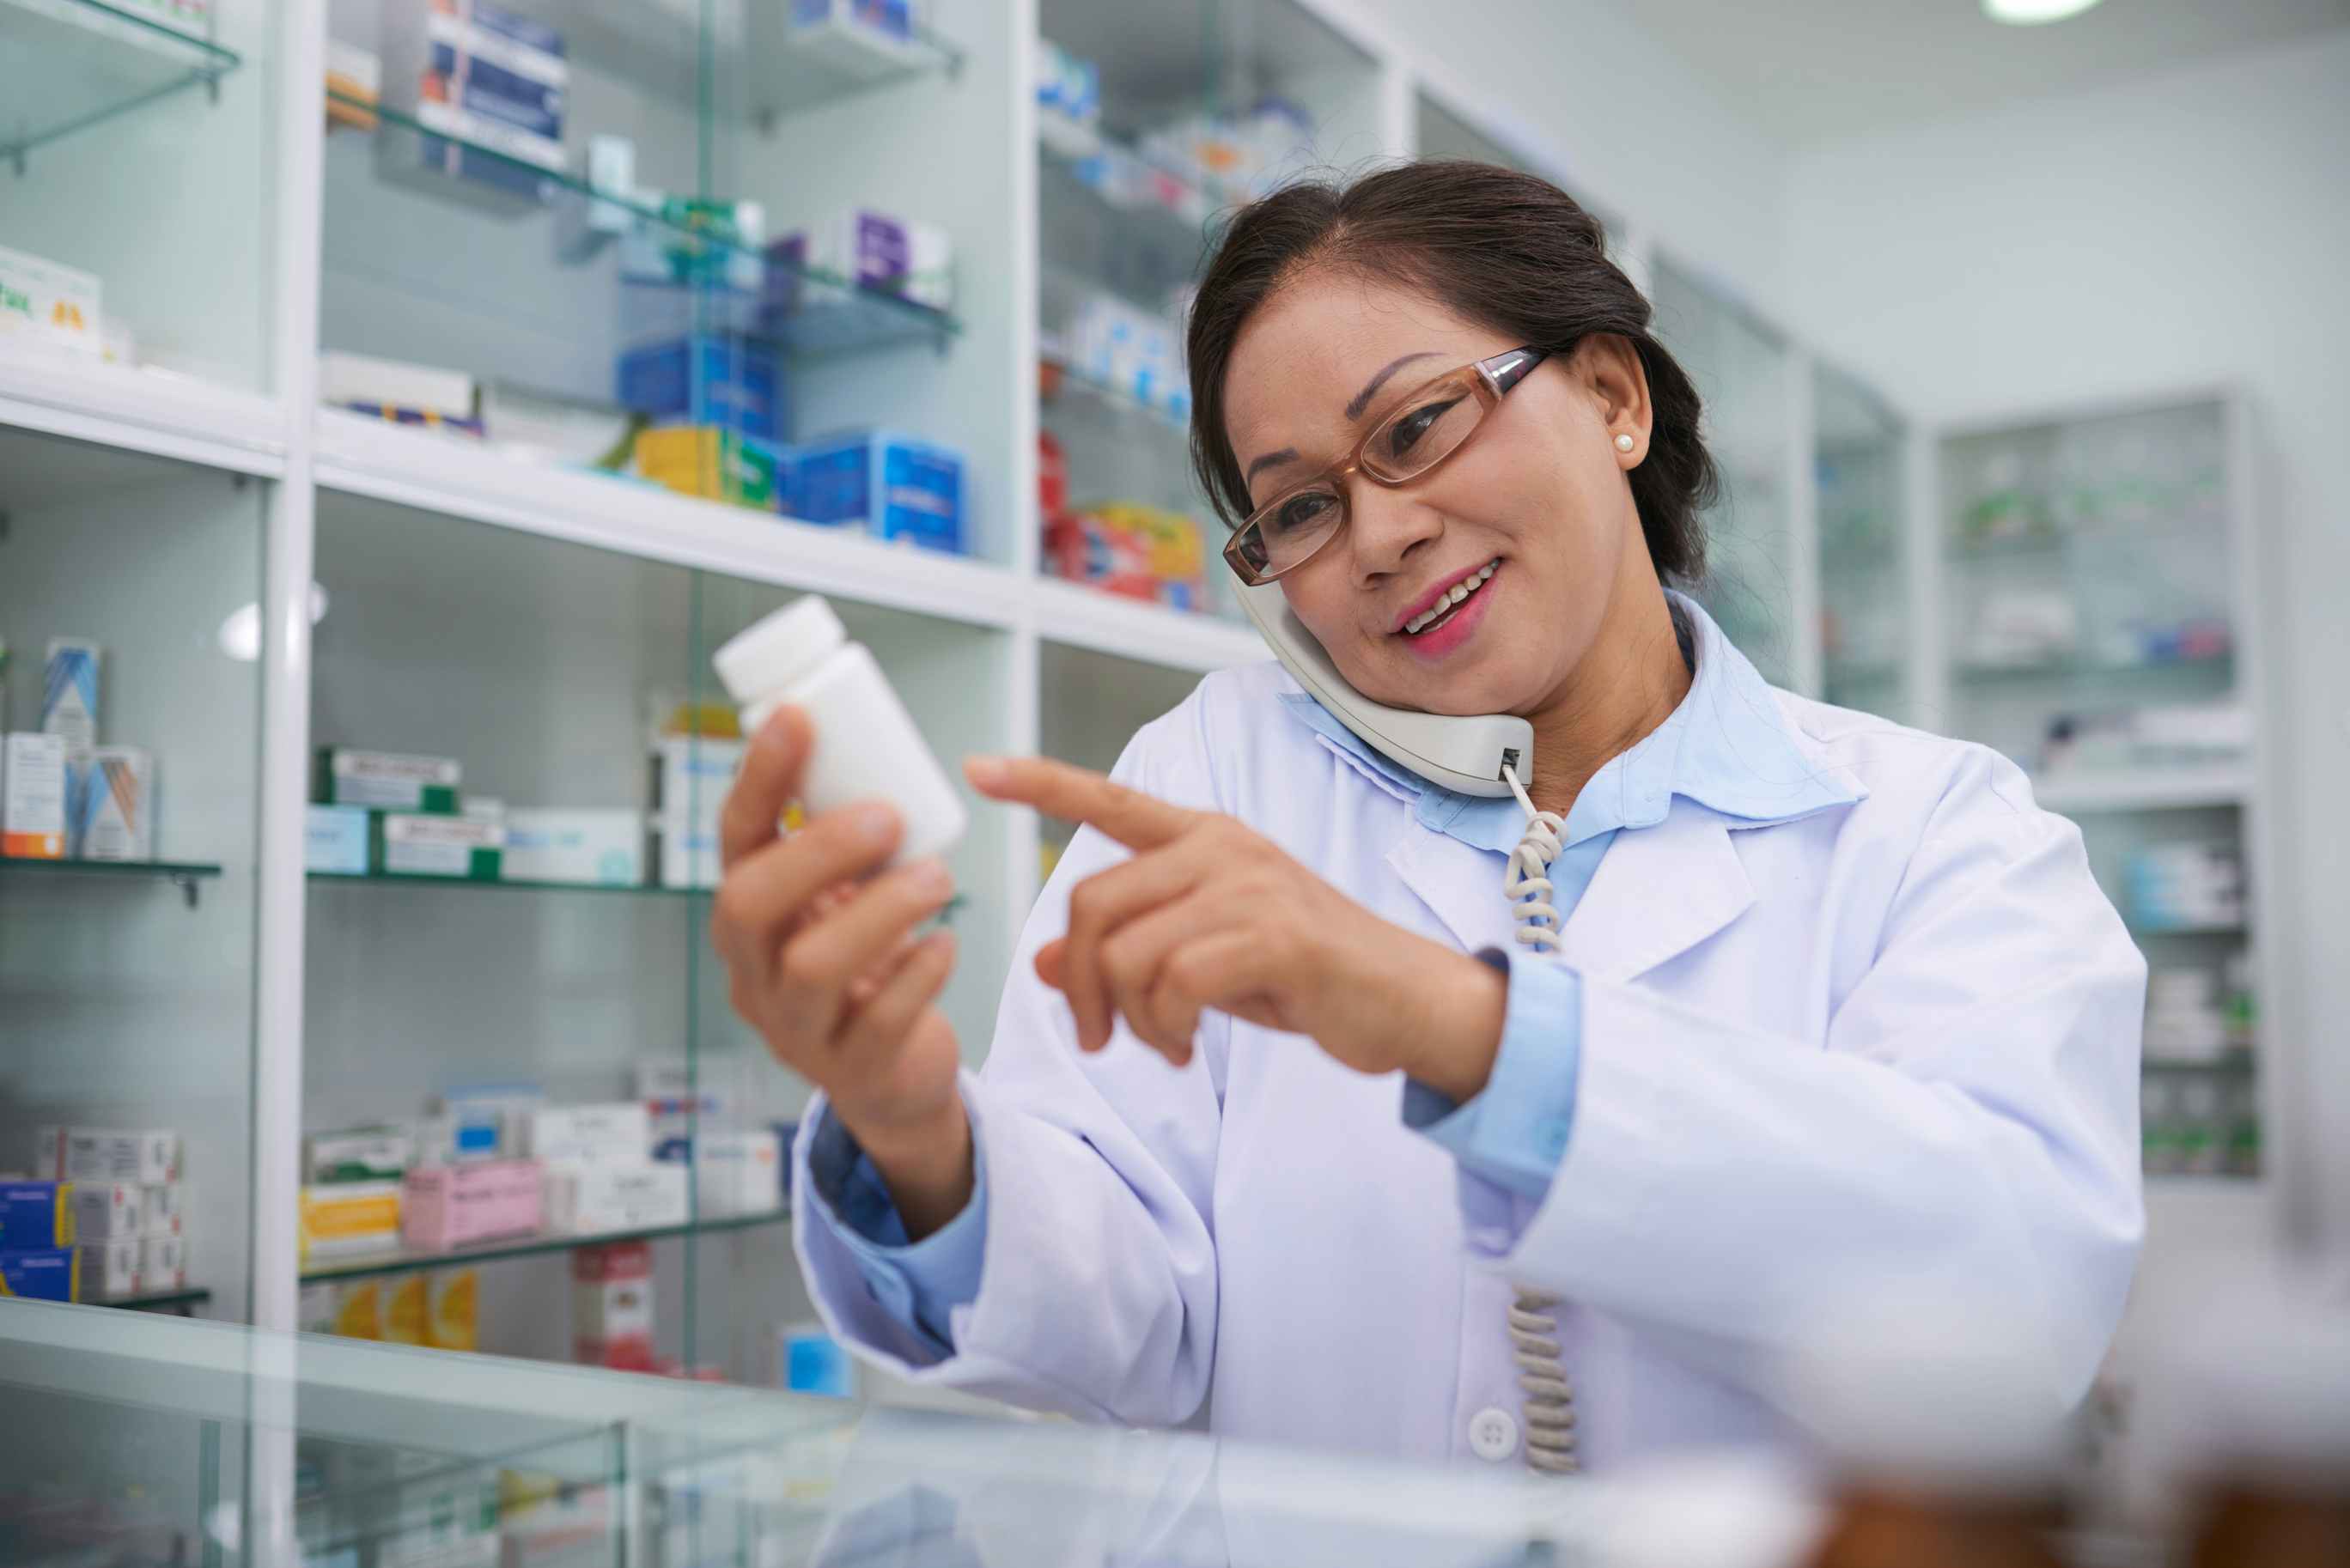 A pharmacist looking at a bottle of pills and talking on the phone.